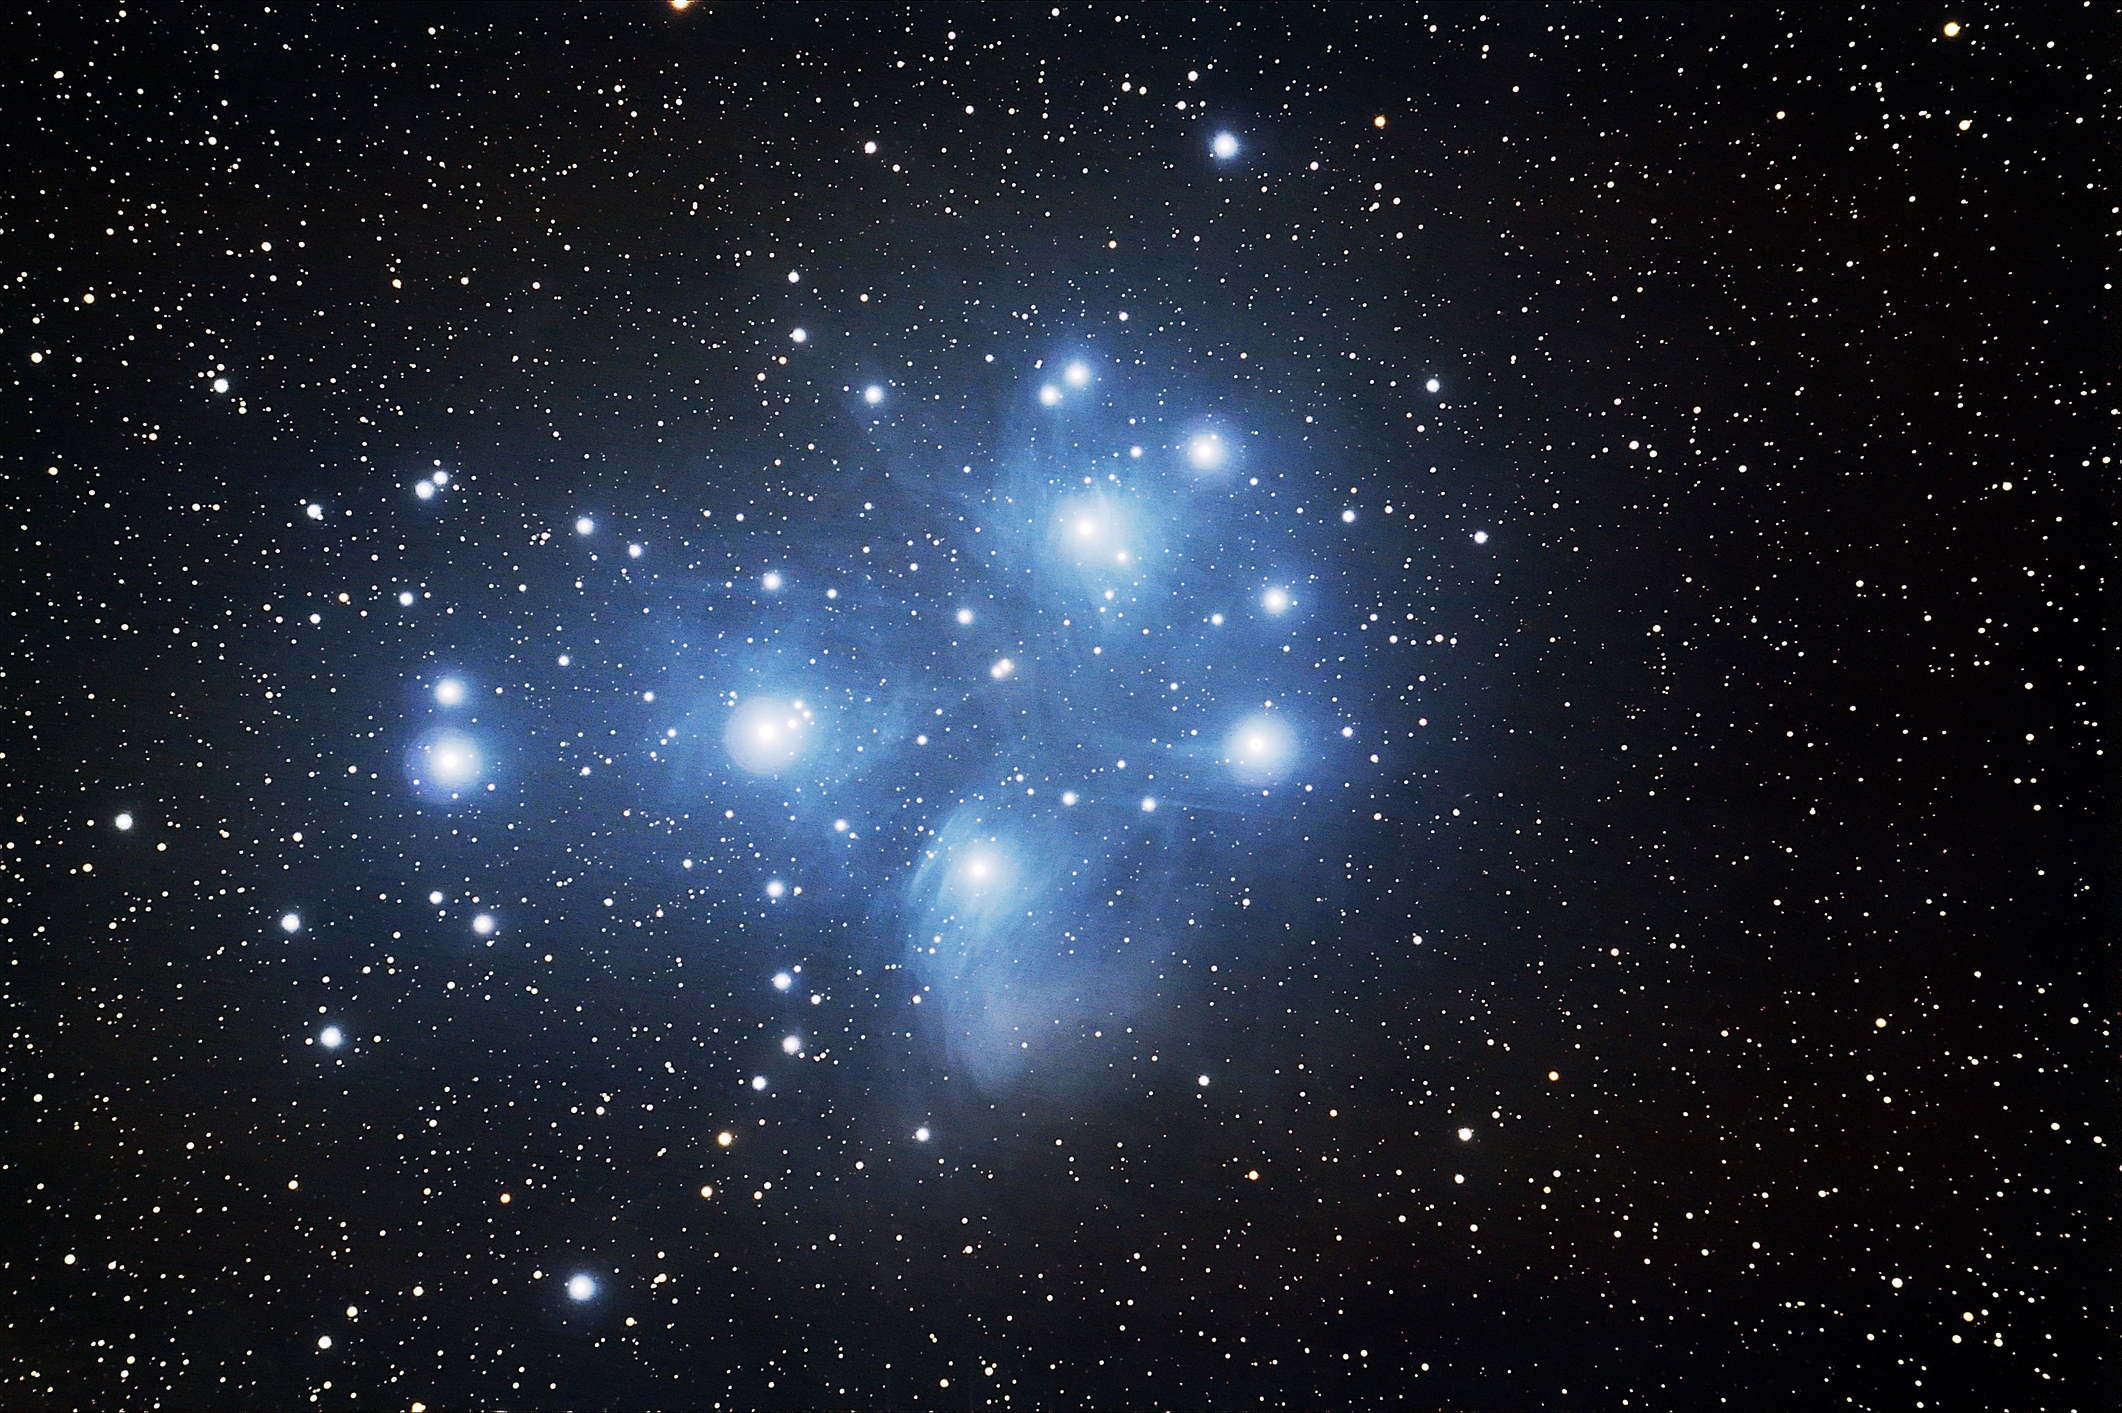 The Pleiades (M45), a cluster of bright blue stars against a backdrop of much dimmer and smaller white stars.